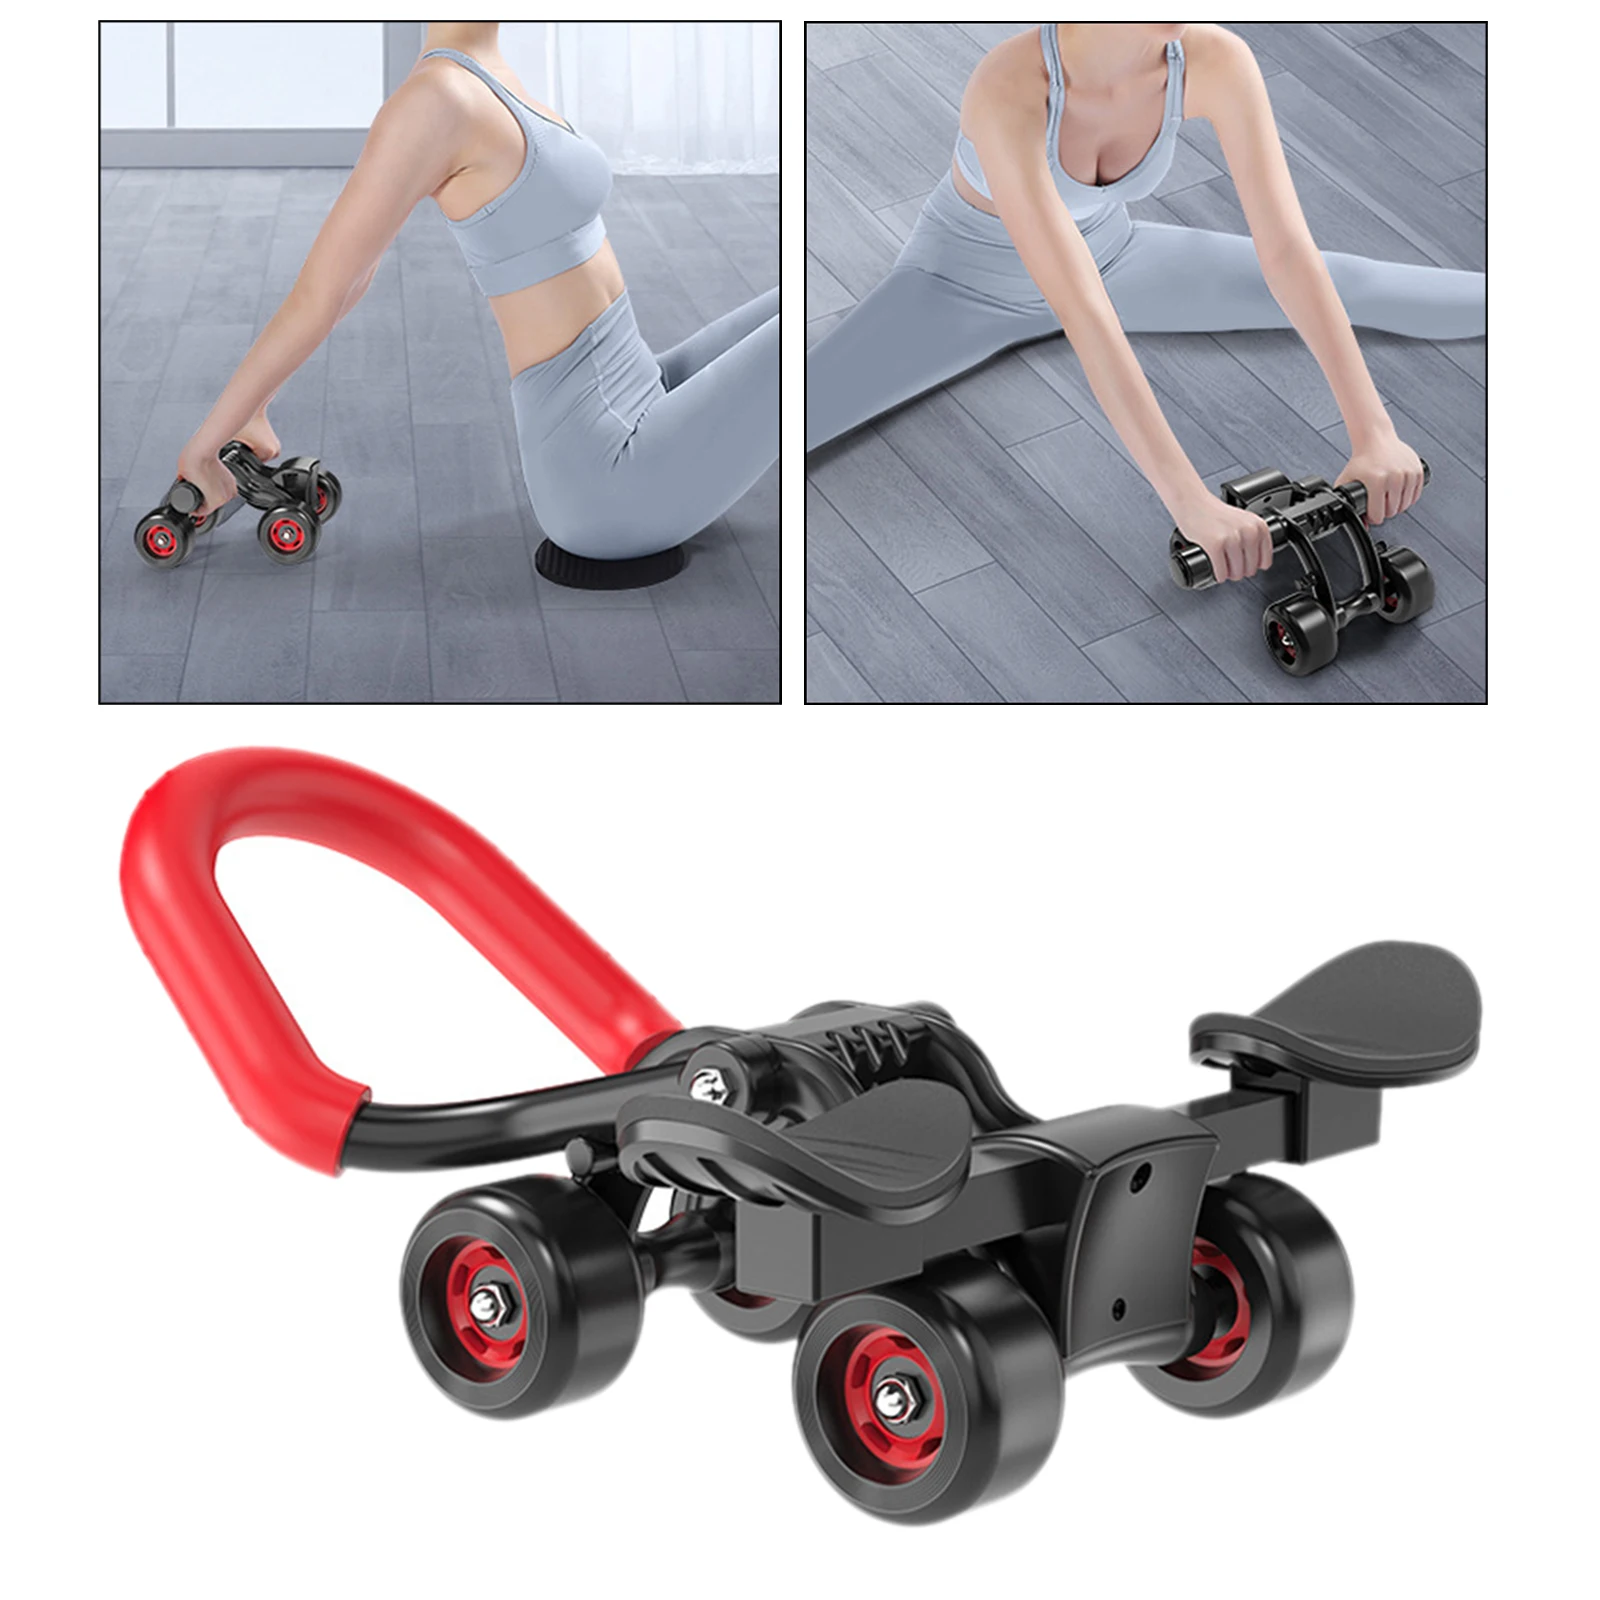 Home Gym Workout Exercise Equipment Core Strength Training Wheel Machine Trainer Waist Belly Shaper Toner Wheels